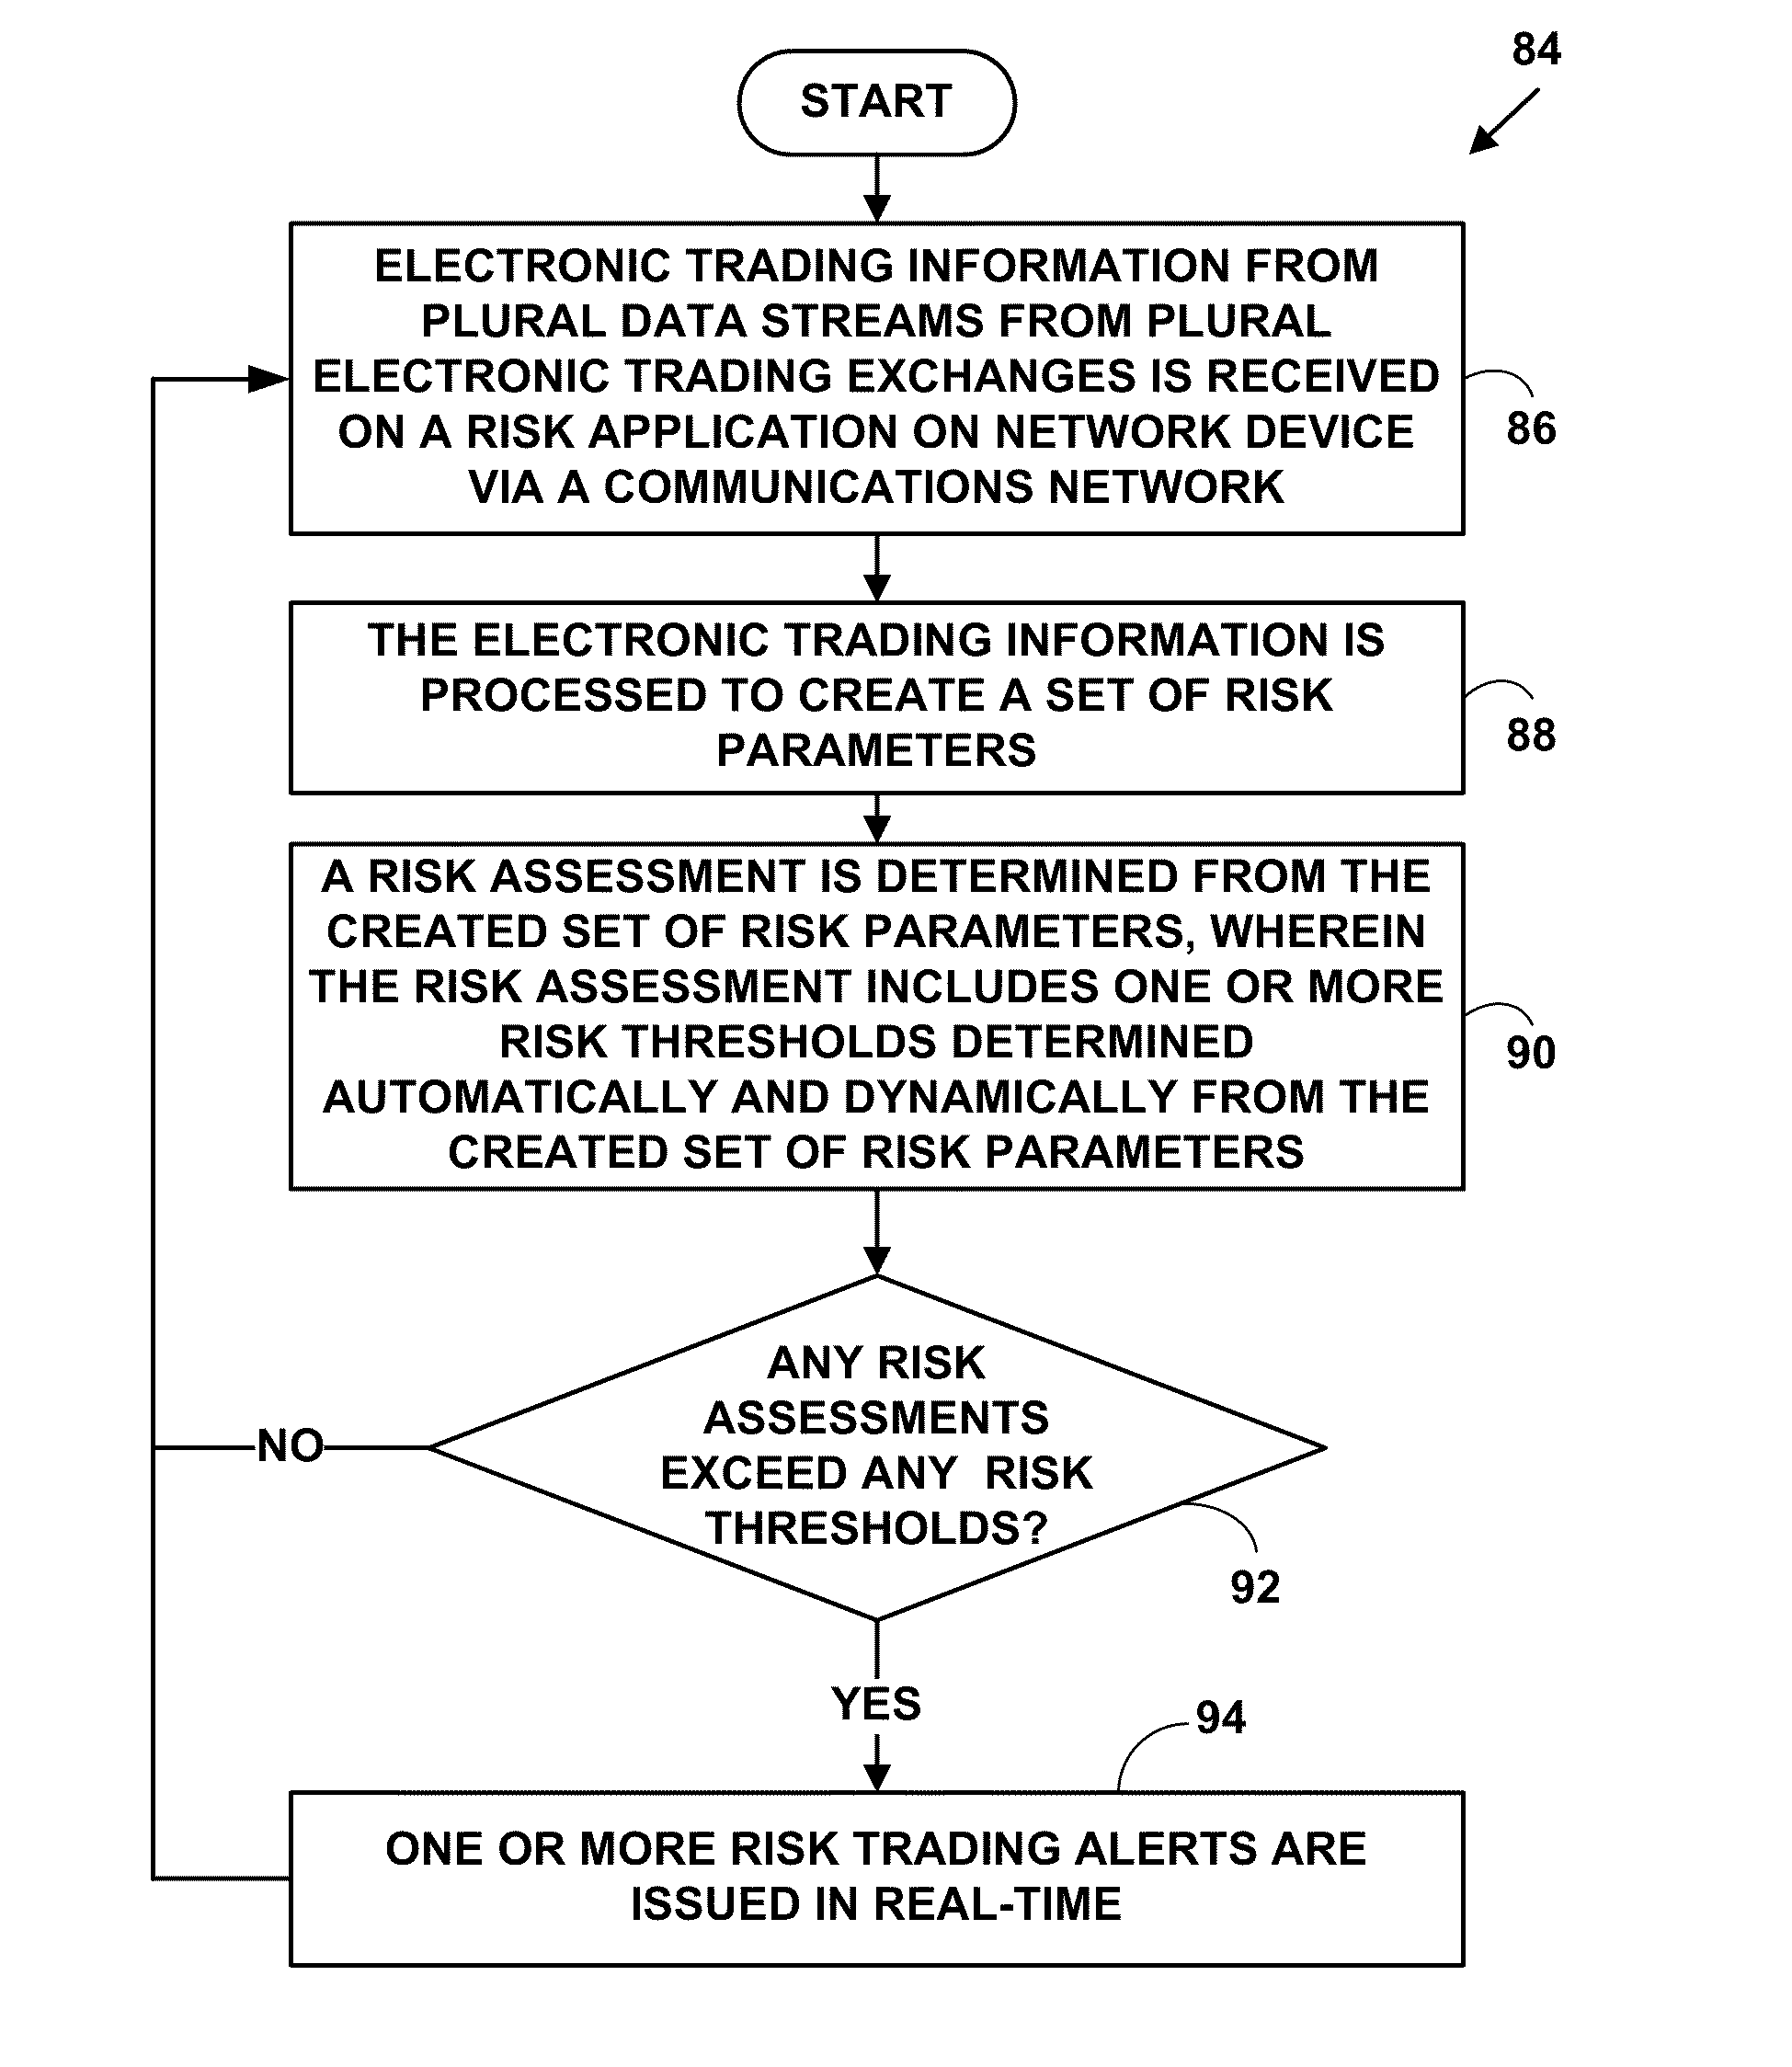 Method and system for providing electronic information for risk assesement and management via net worth for multi-market electronic trading